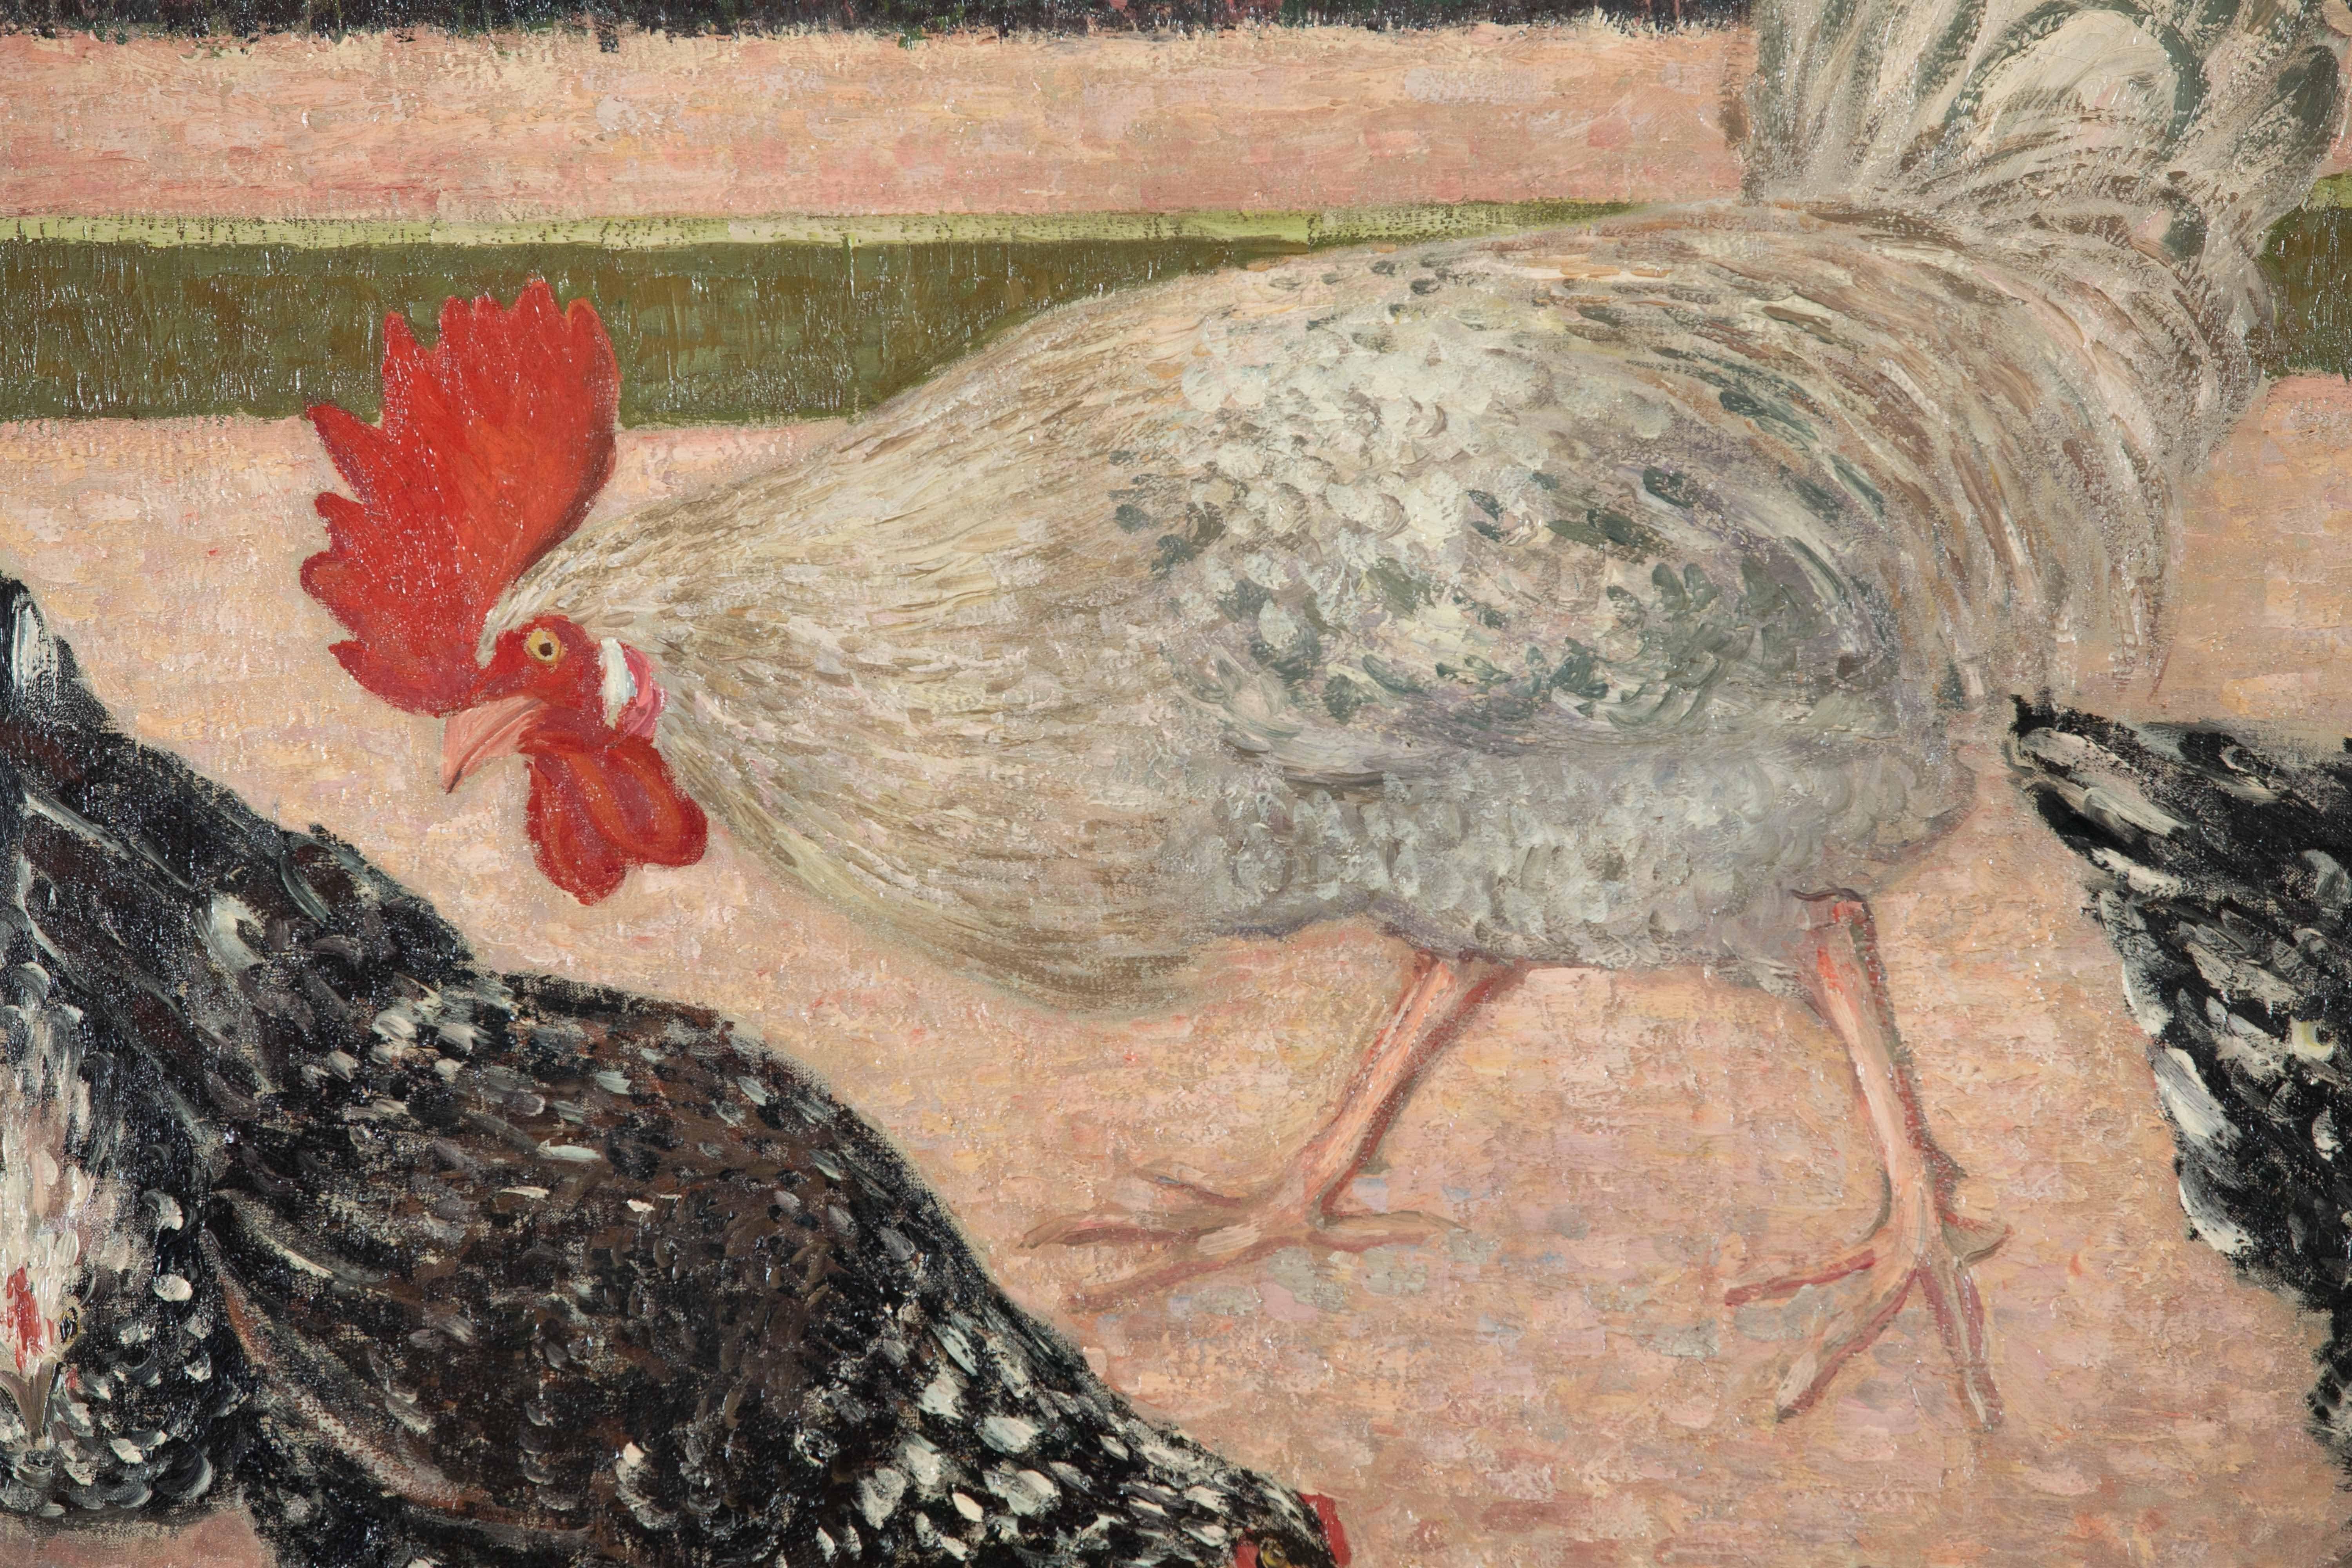 Coq et poules by Georges Manzana Pissarro (1871-1961)
Oil on canvas
65 x 81 cm (25 ⁵/₈ x 31 ⁷/₈ inches)
Signed and dated lower right, G. Manzana. 00 
Executed in 1900

This work is accompanied by a certificate of authenticity from Lélia Pissarro.